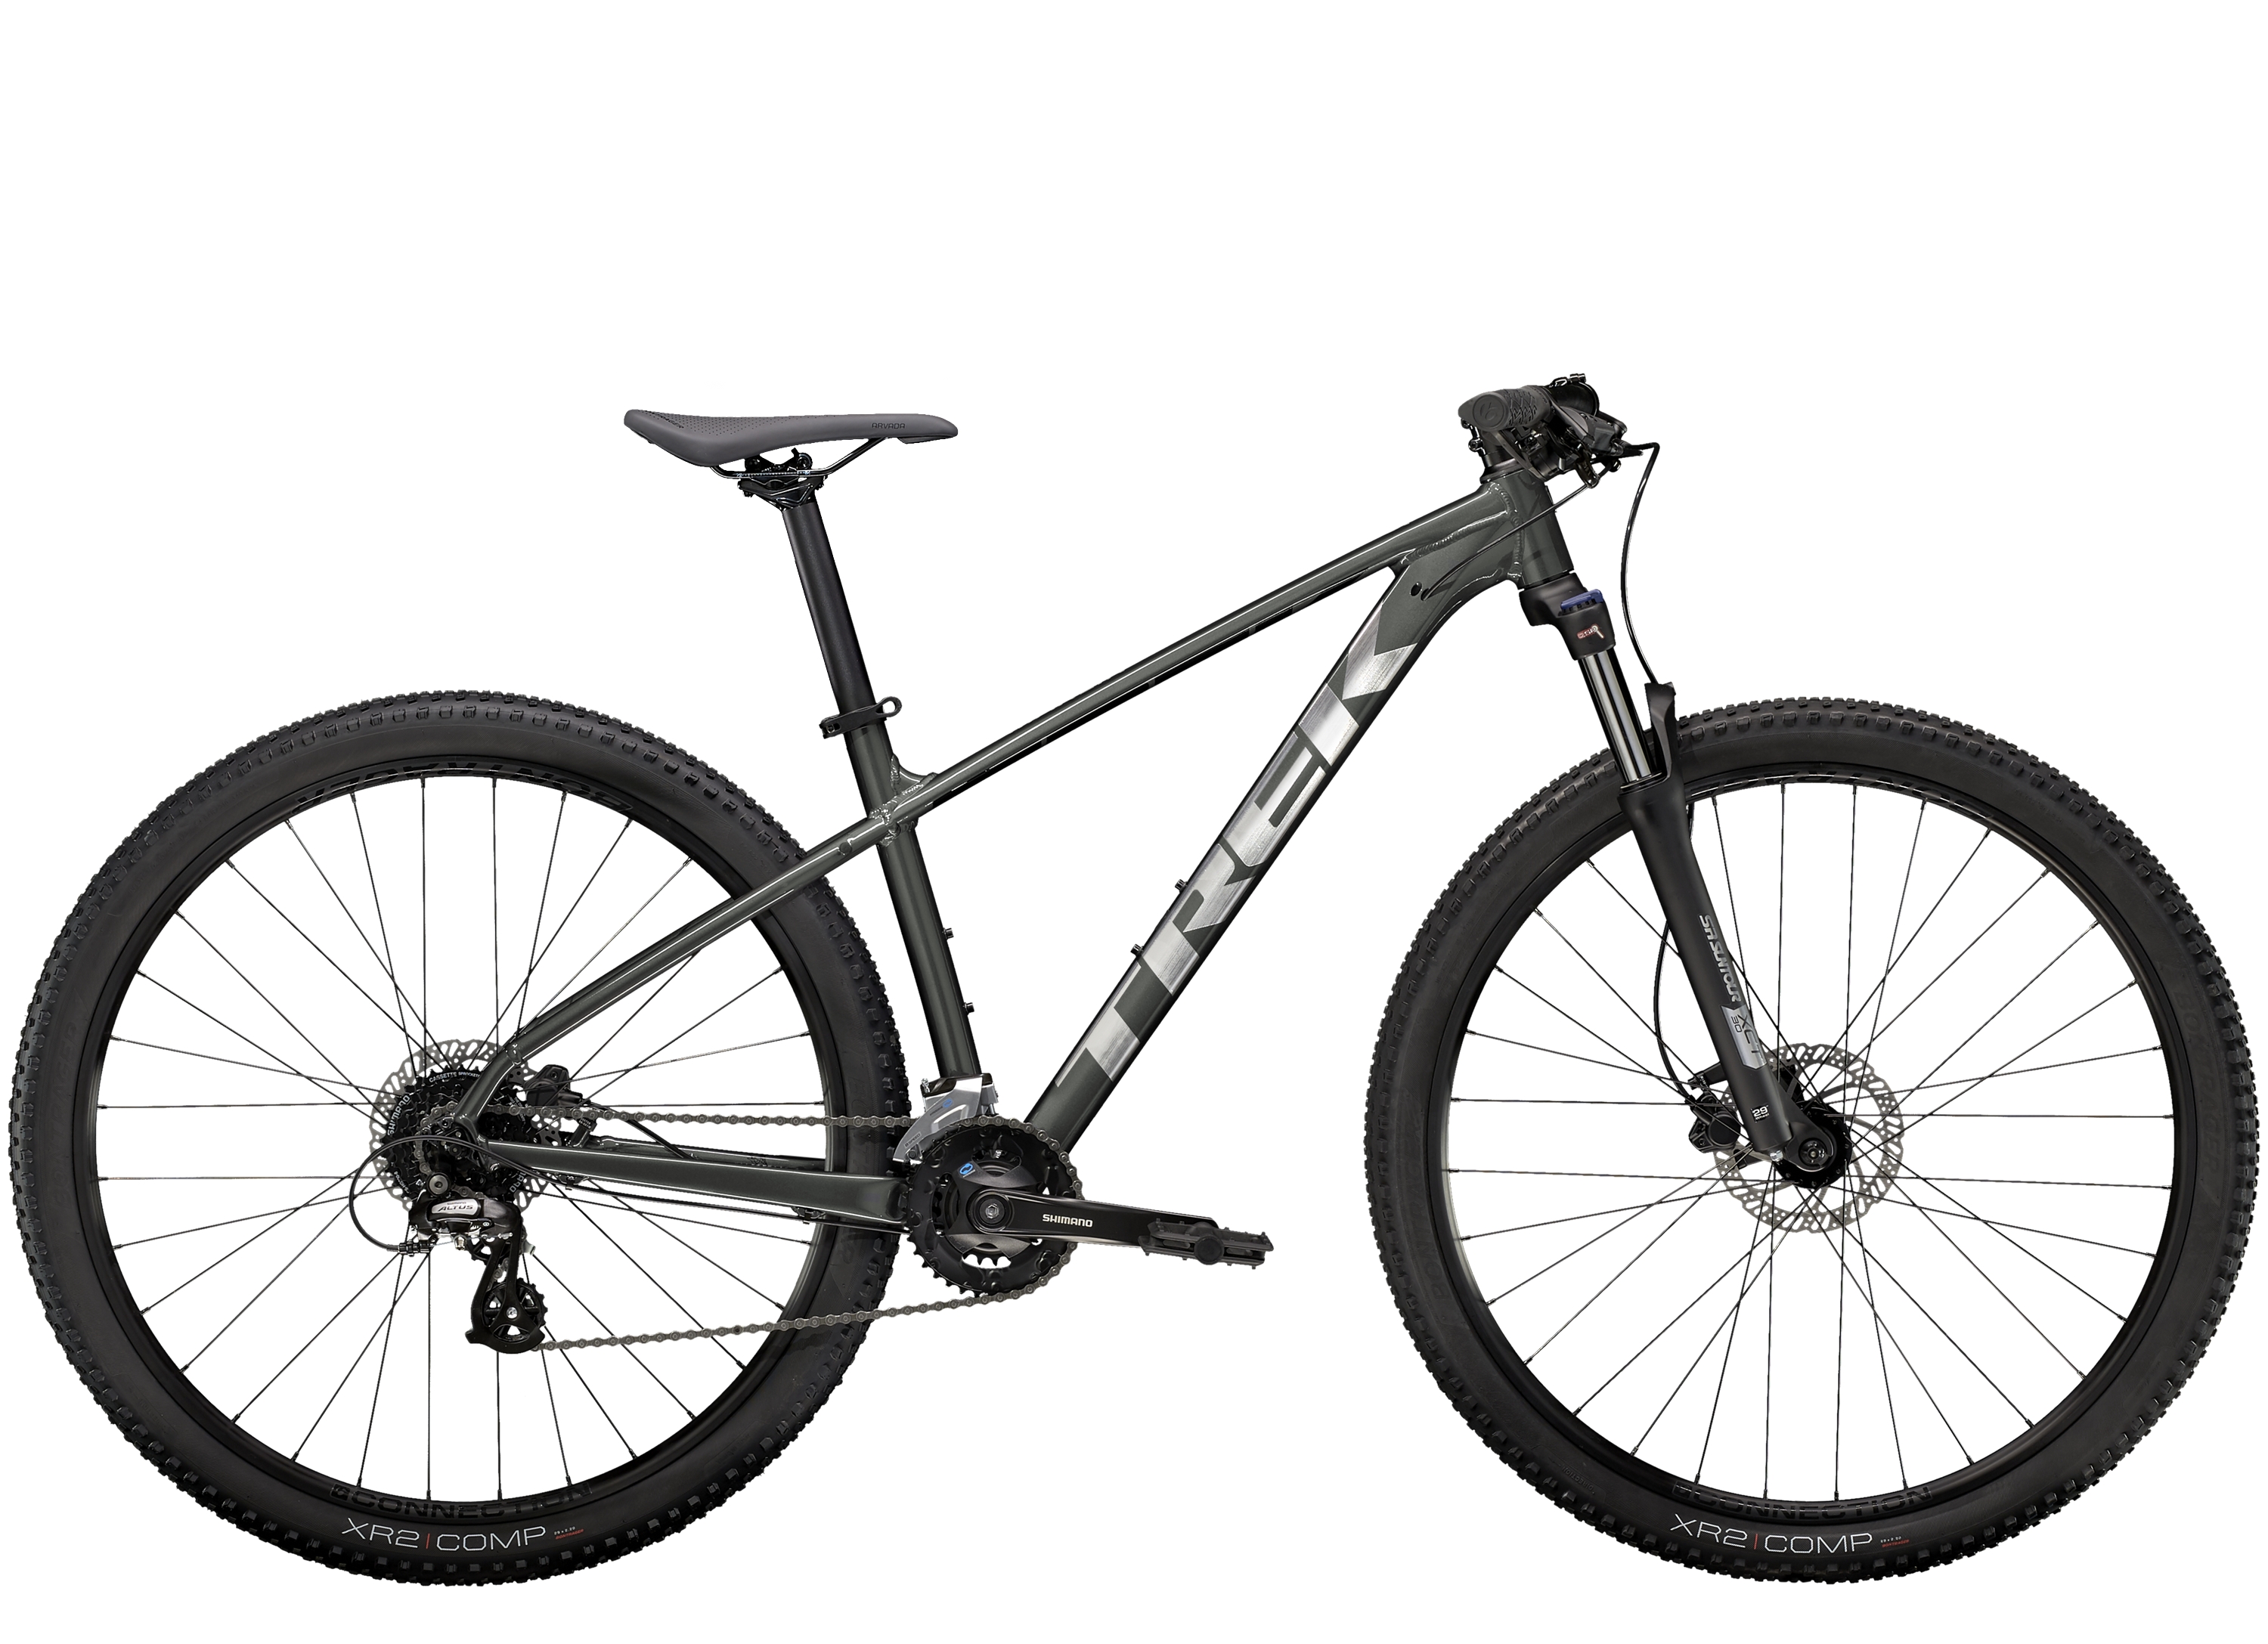 <a href="https://cycles-clement.be/product/marlin-5-xl-29-lithium-grey/">MARLIN 5 XL 29 LITHIUM GREY</a>